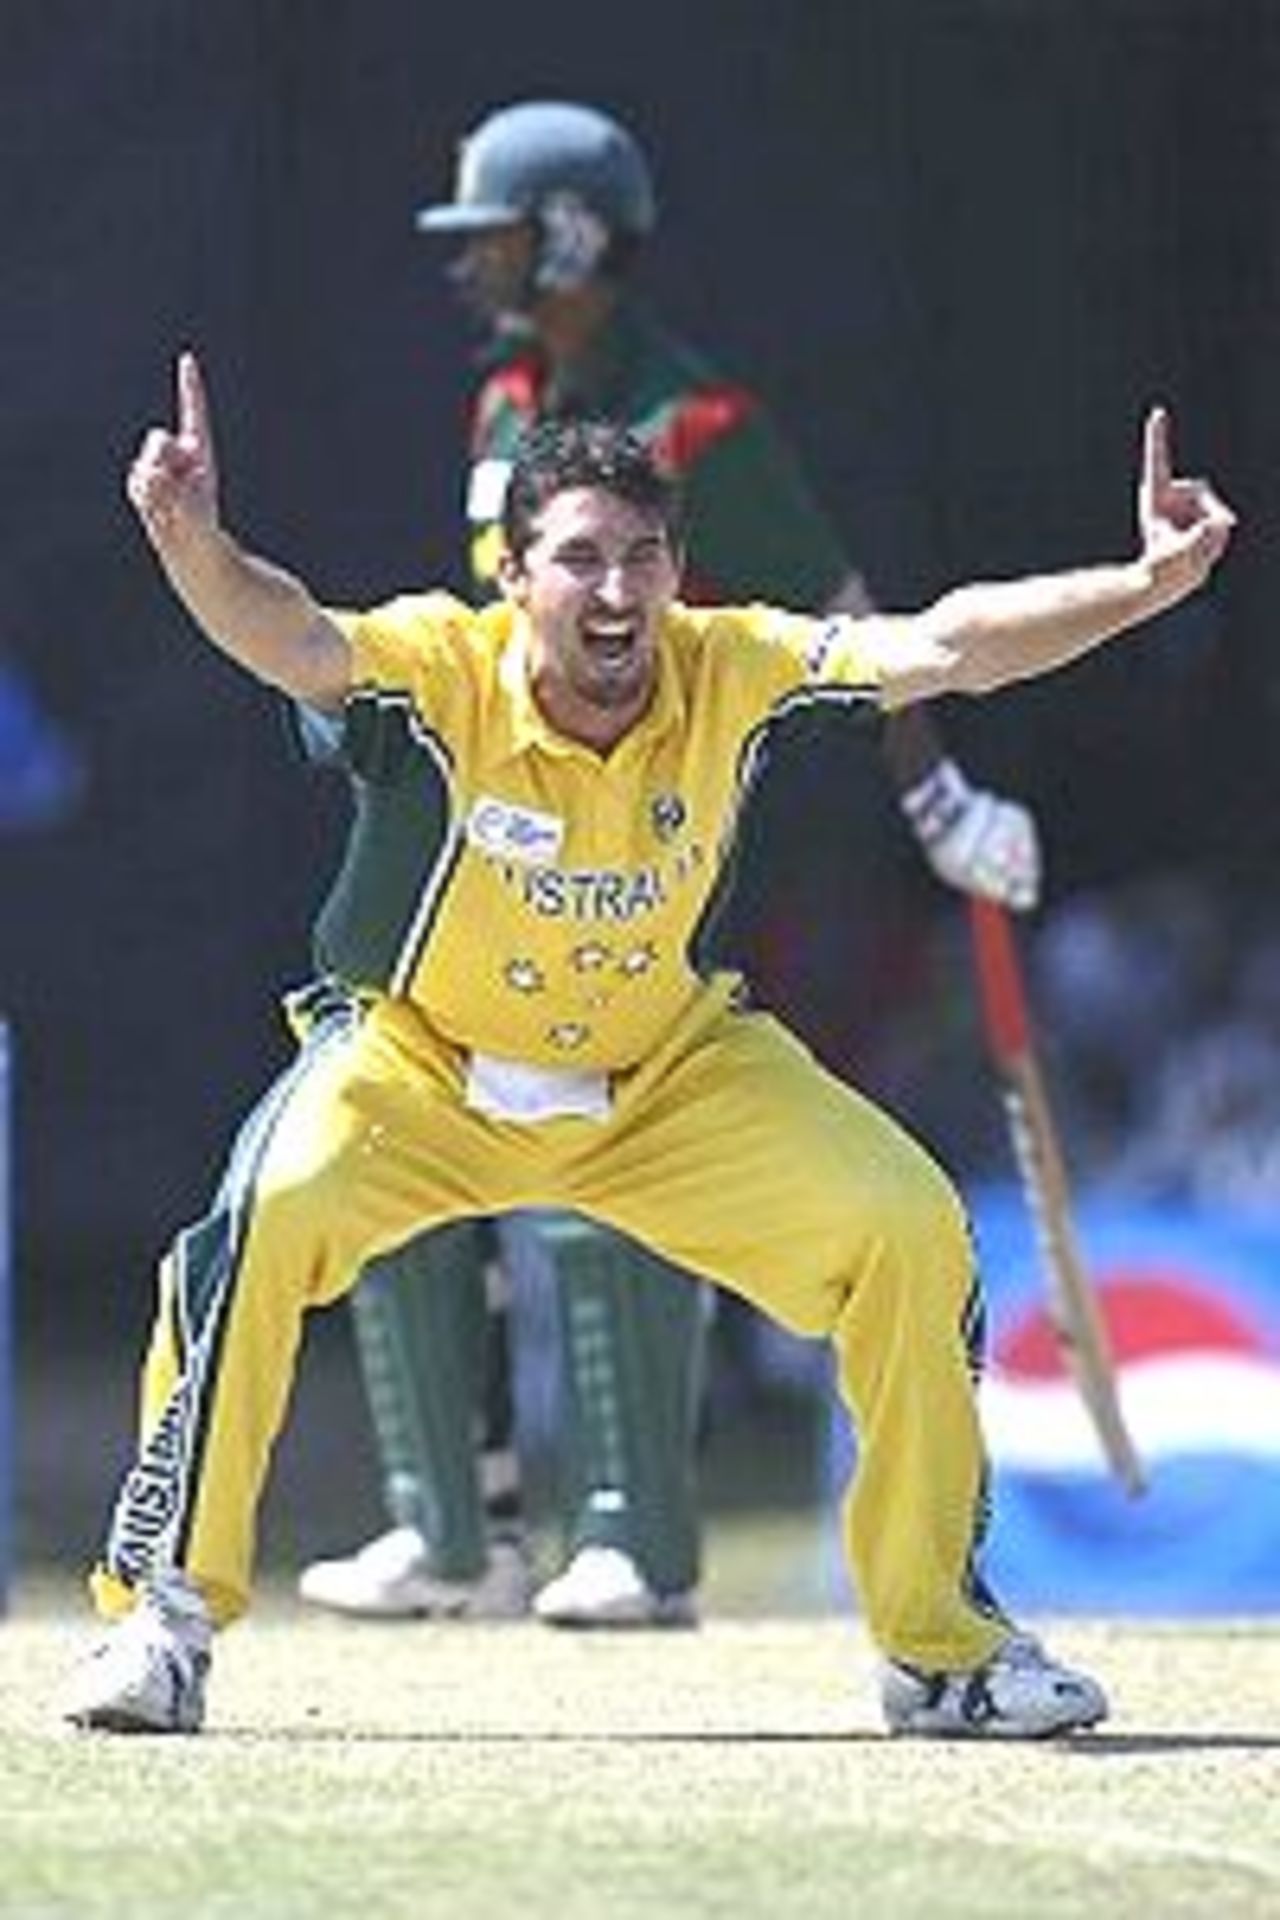 COLOMBO - SEPTEMBER 19: Jason Gillespie of Australia appeals successfully for the wicket of Al Sahariar of Bangladesh during the ICC Champions Trophy match between Australia and Bangladesh played at the SSC Stadium in Colombo, Sri Lanka on September 19, 2002.